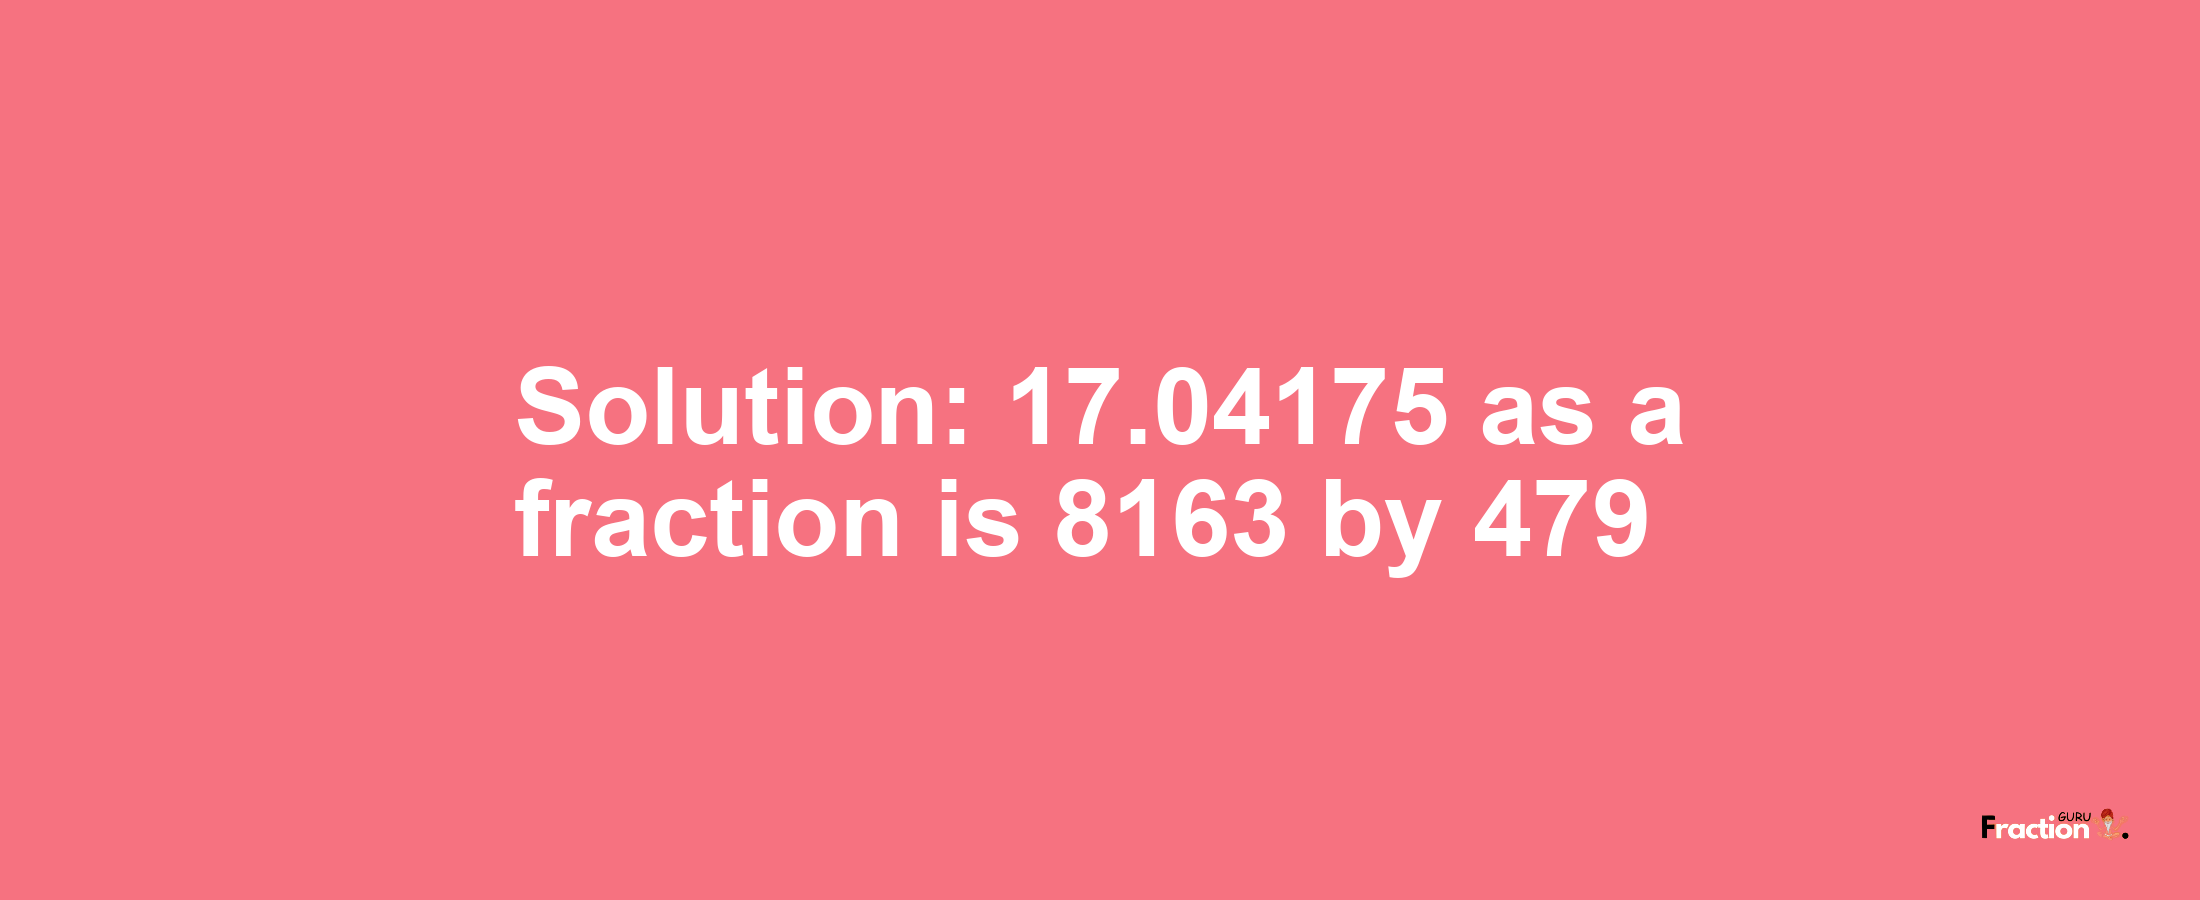 Solution:17.04175 as a fraction is 8163/479